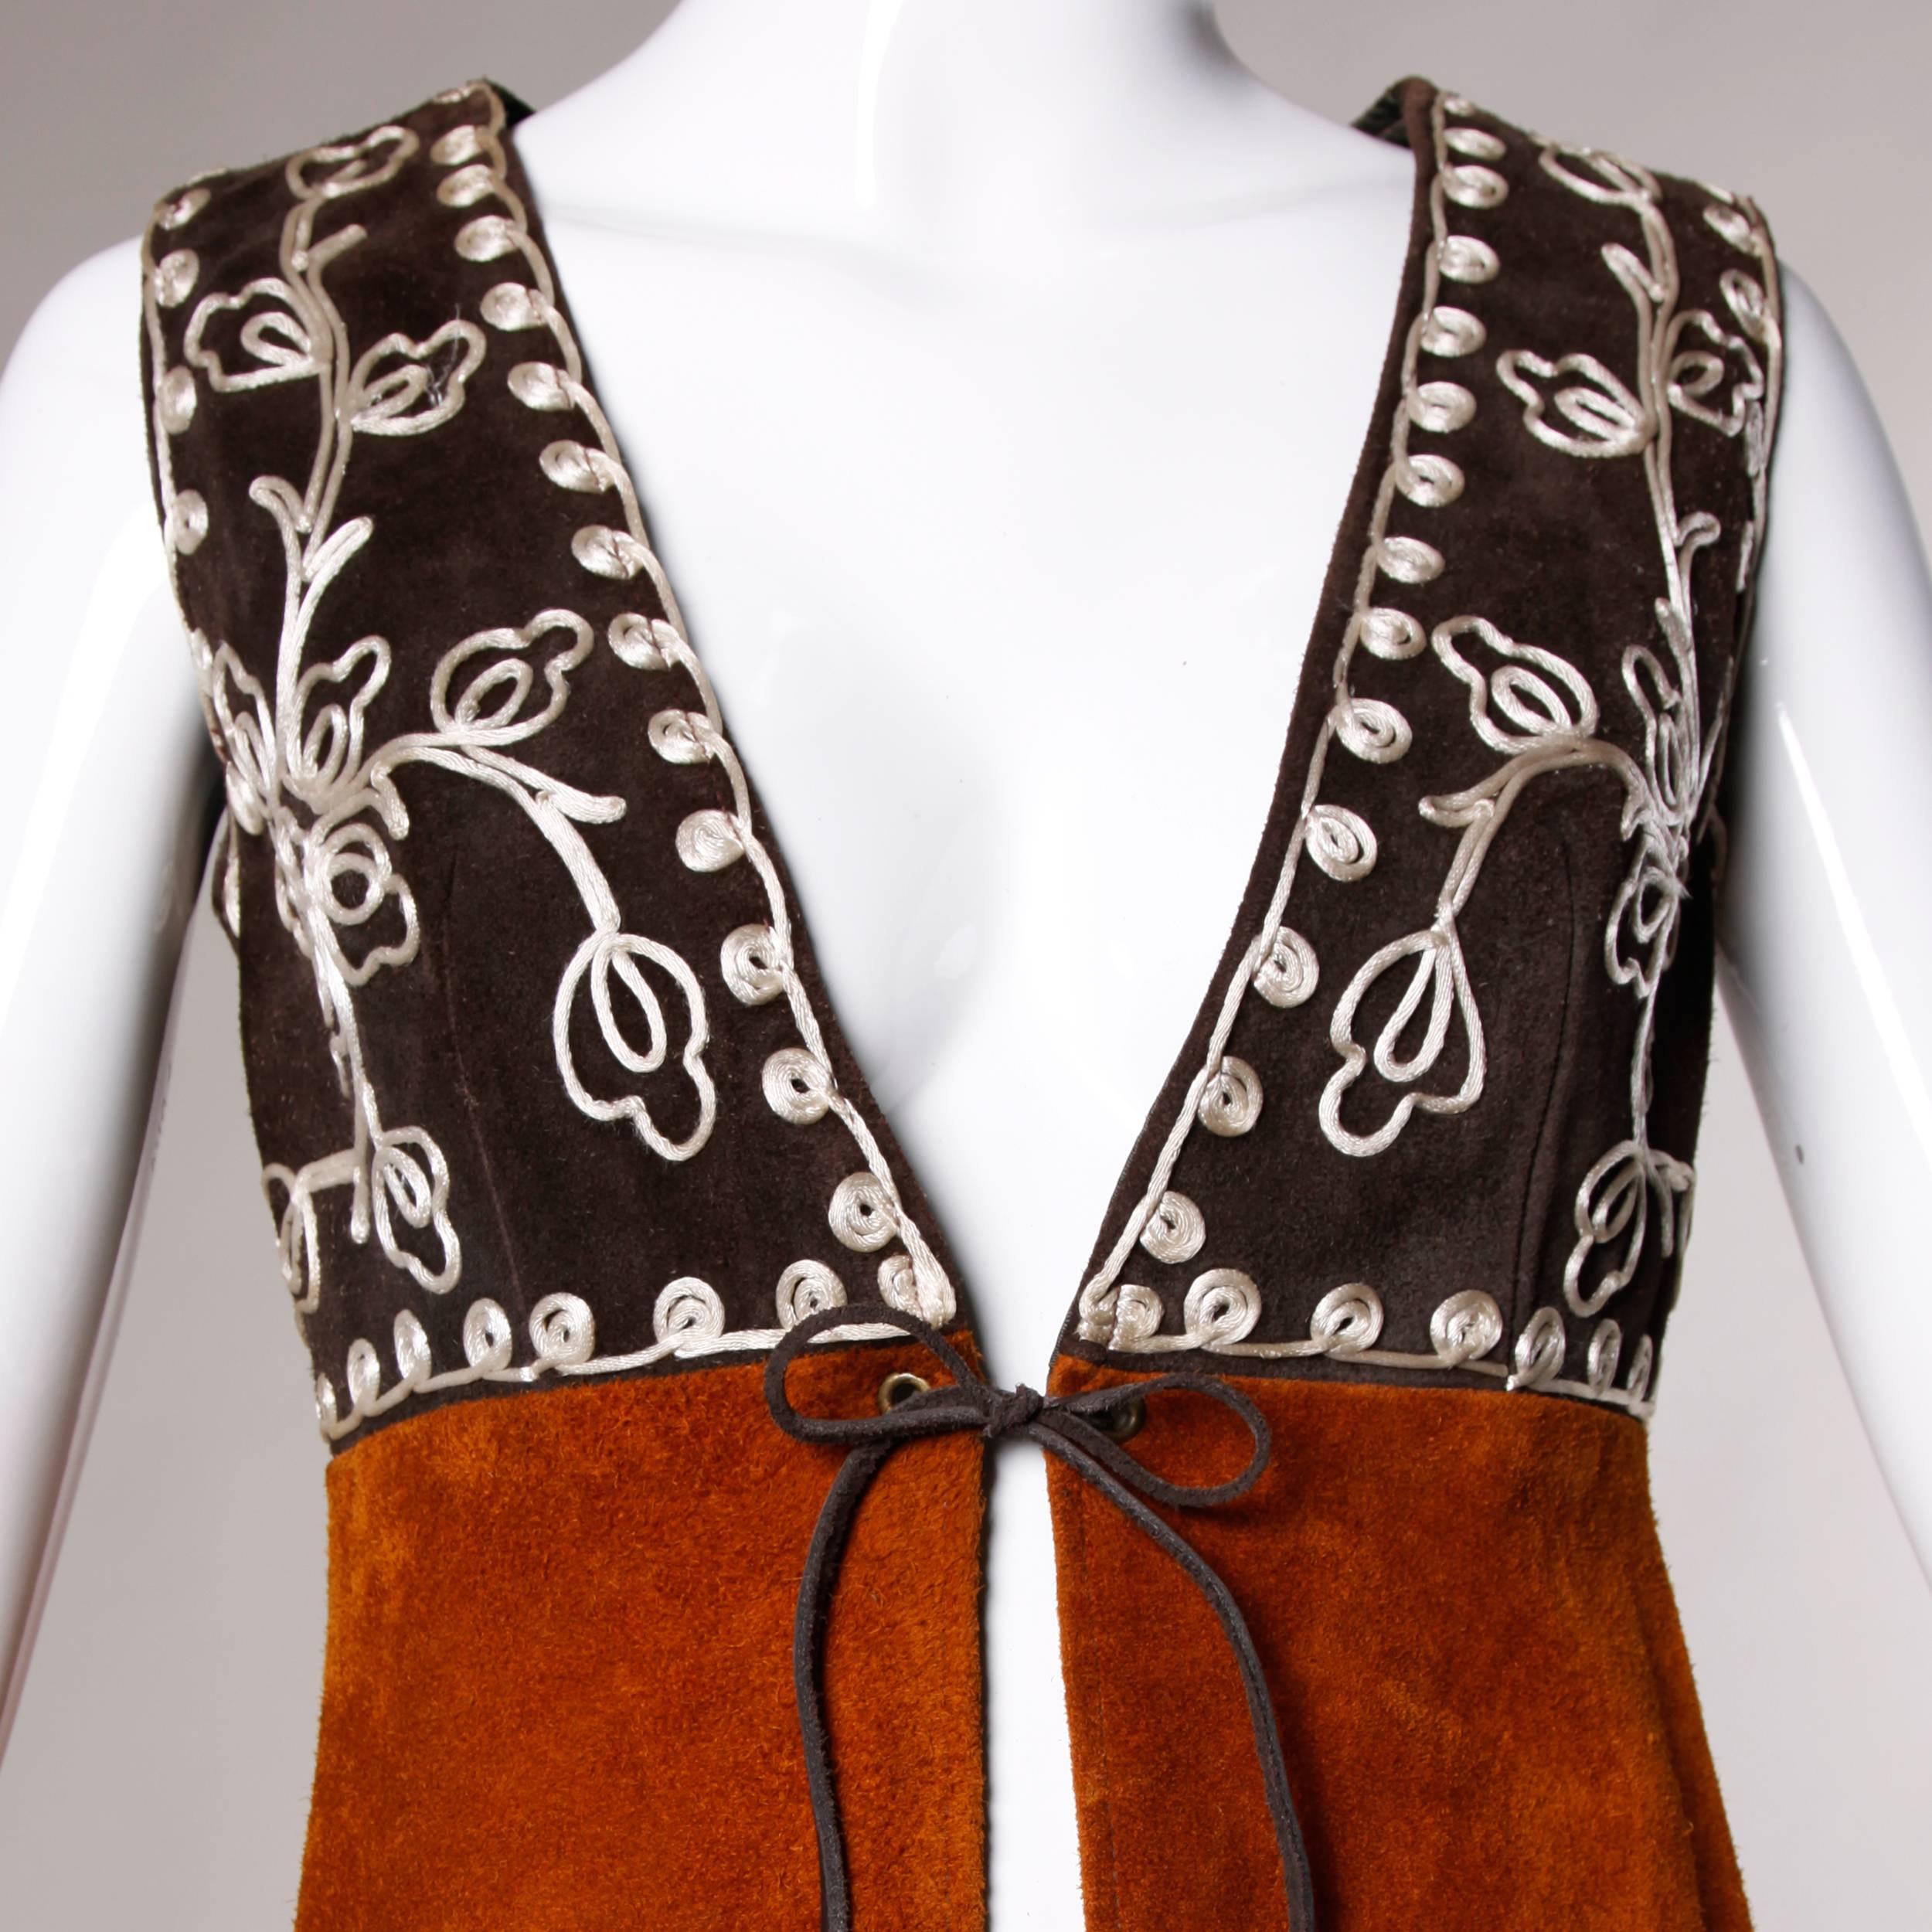 Phenomenal long vintage two tone suede vest with a back kick pleat and hand whip stitch detailing. White cord embroidery and single tie closure at the front.

Details:

Fully Lined
Front Tie Closure
Marked Size: Not Marked
Estimated Size: